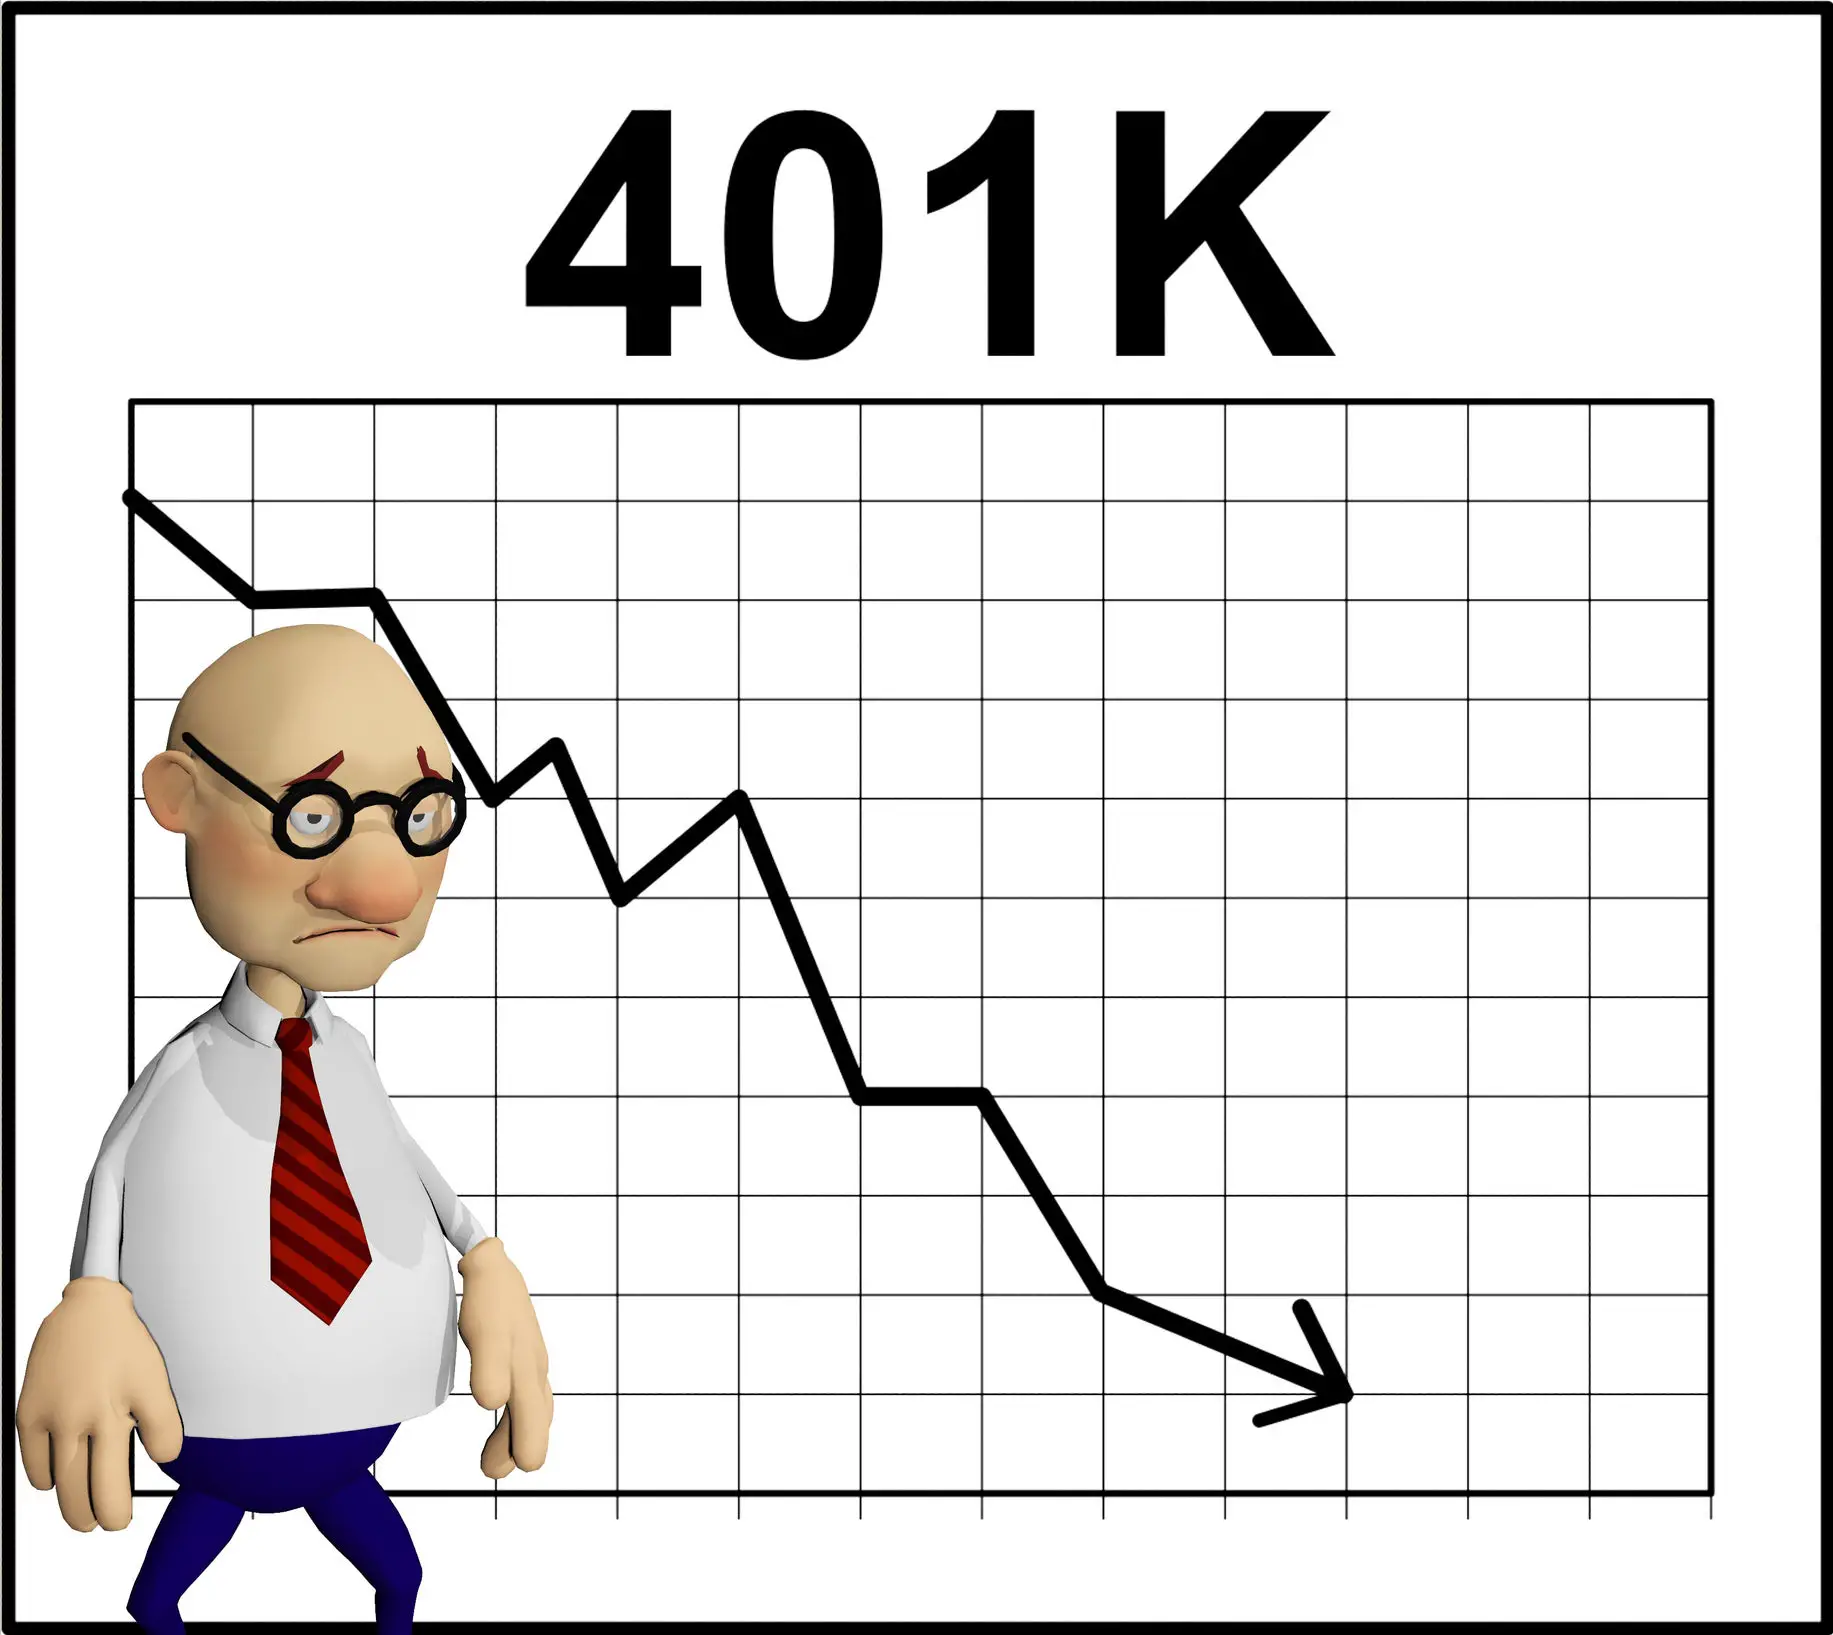 How To Cash Out My 401k